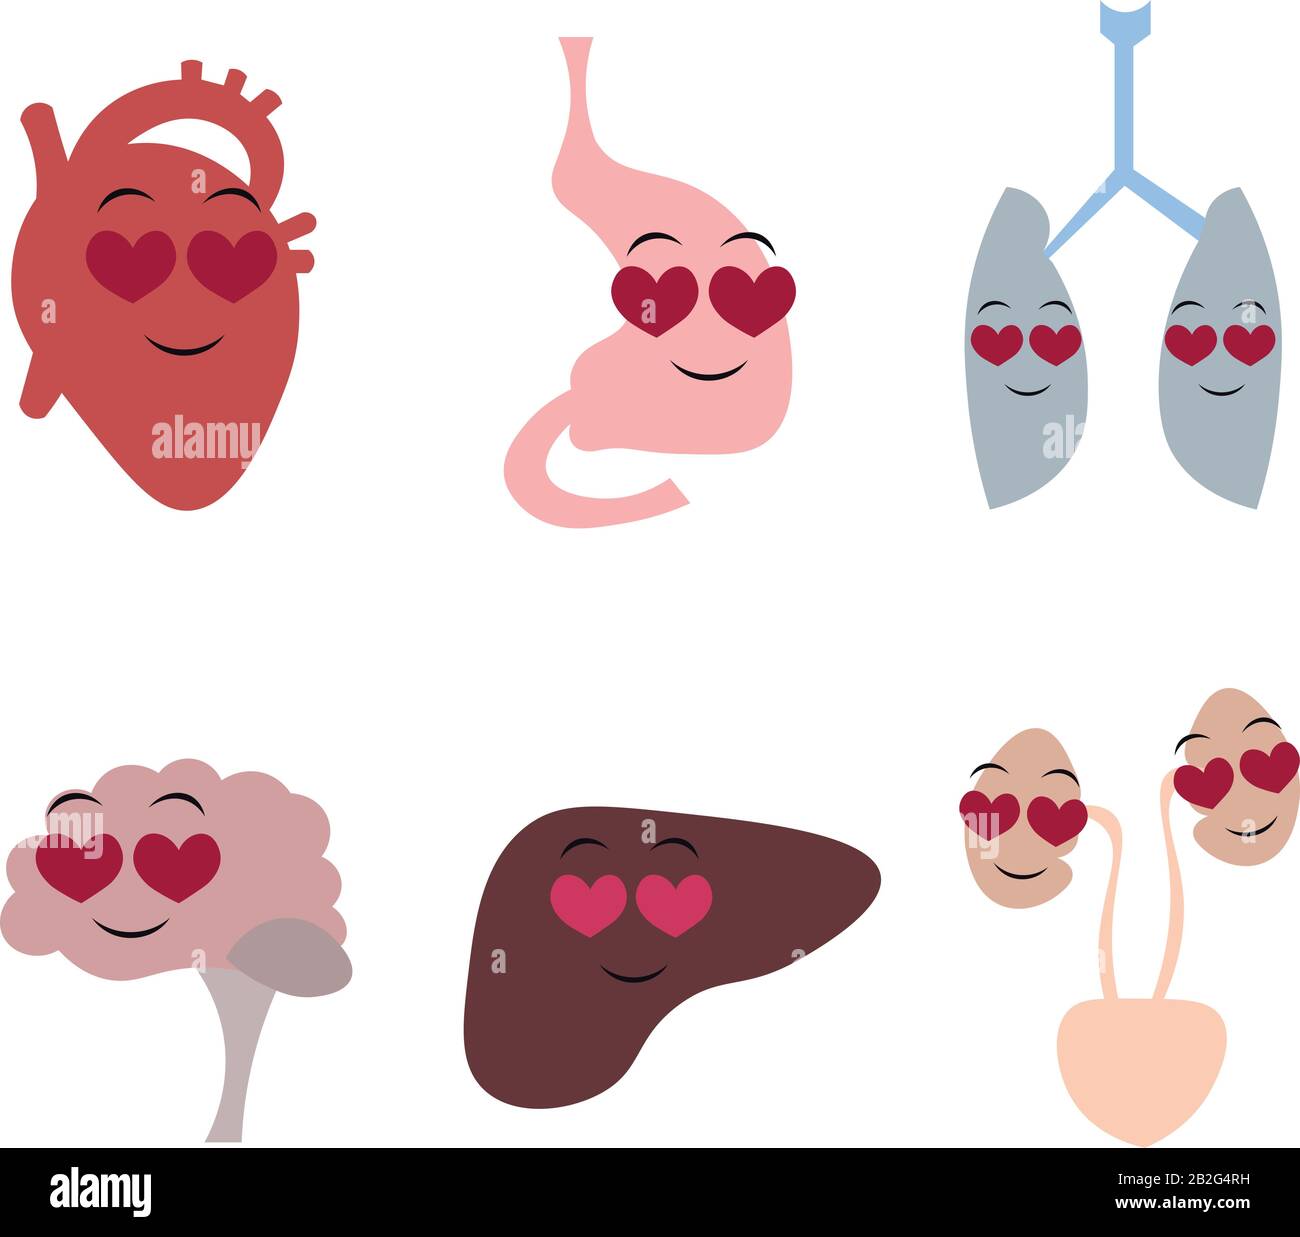 Organs of the human body in the style of cartoon. Heart, brain, respiratory system, digestive system, excretory system. Love, health, family. Design f Stock Vector